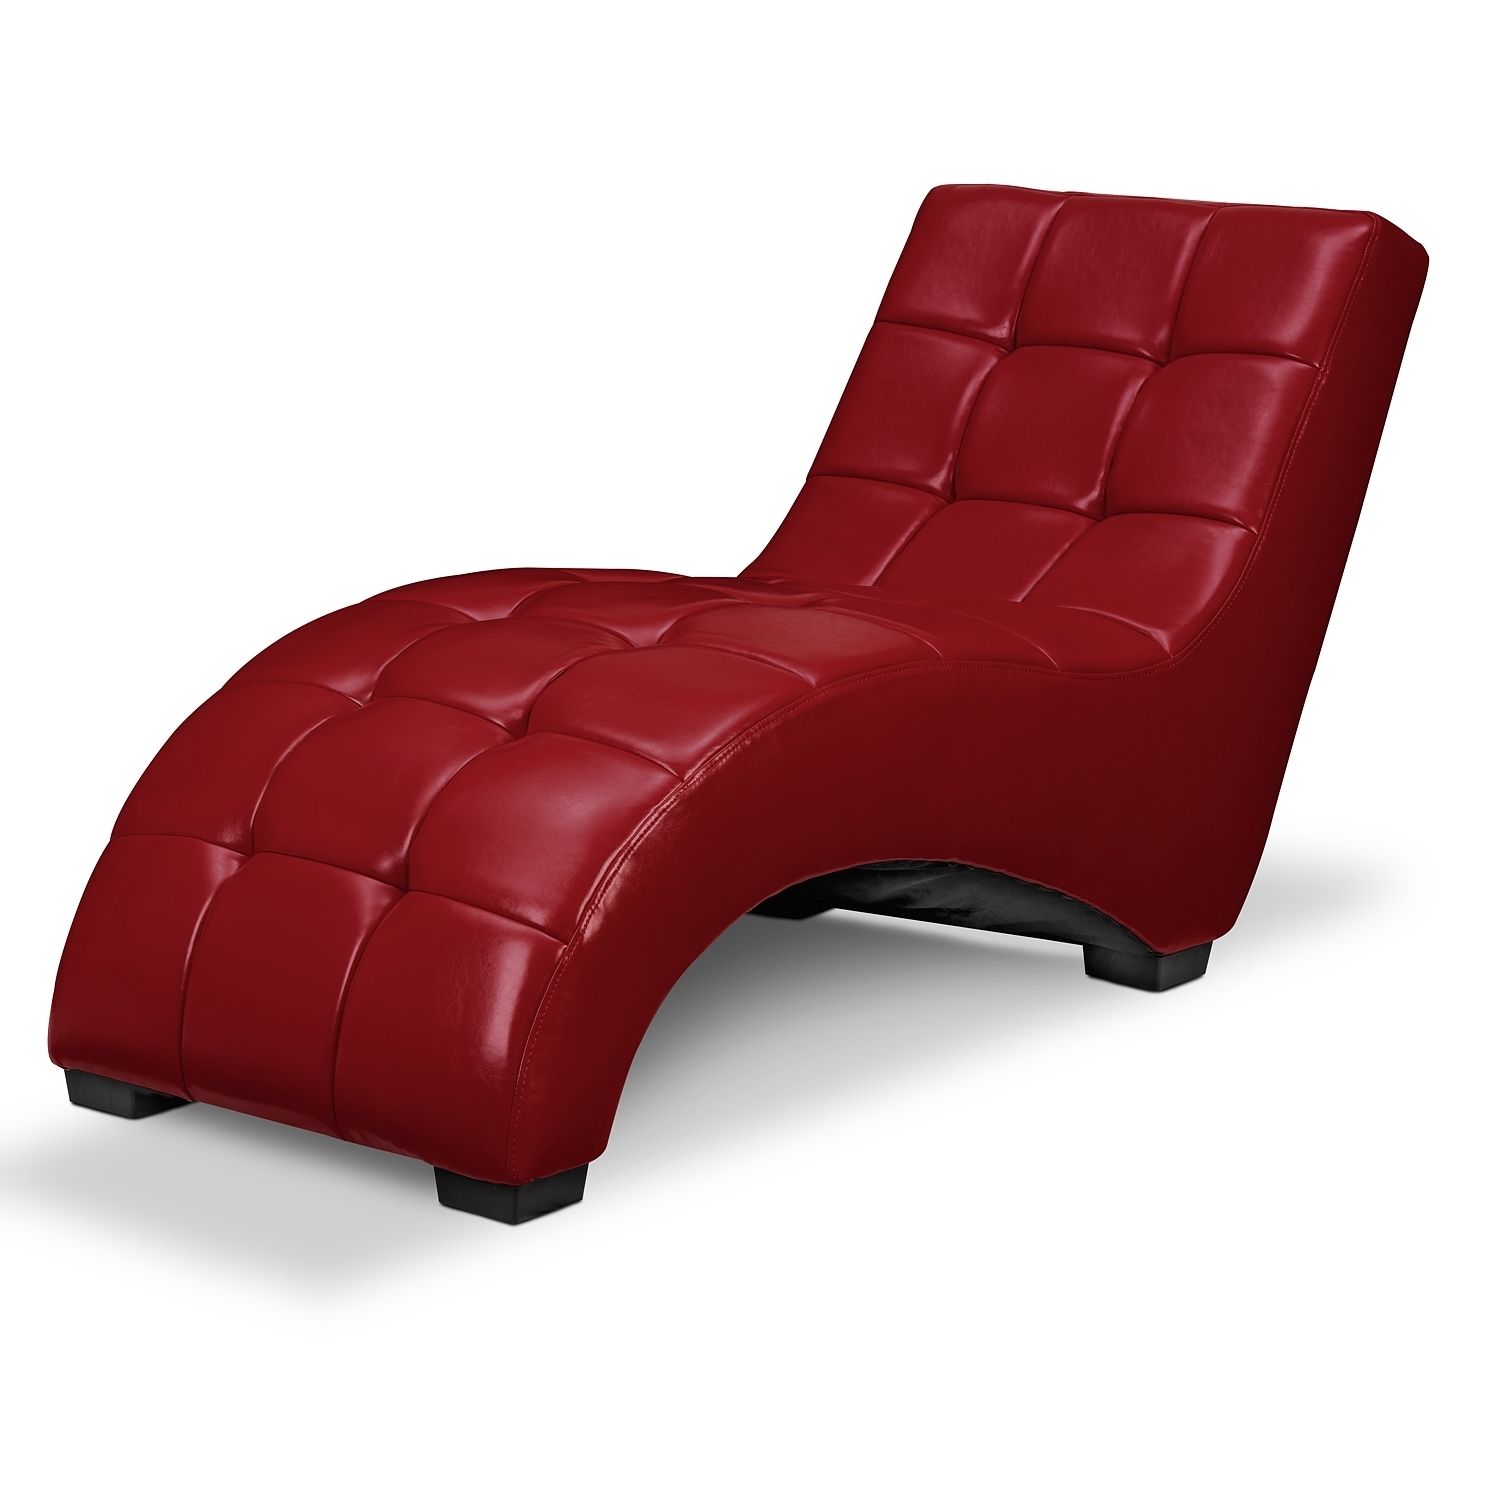 Ideas For Leather Chaise Lounge Design #23847 Regarding Trendy Black Leather Chaise Lounge Chairs (View 13 of 15)